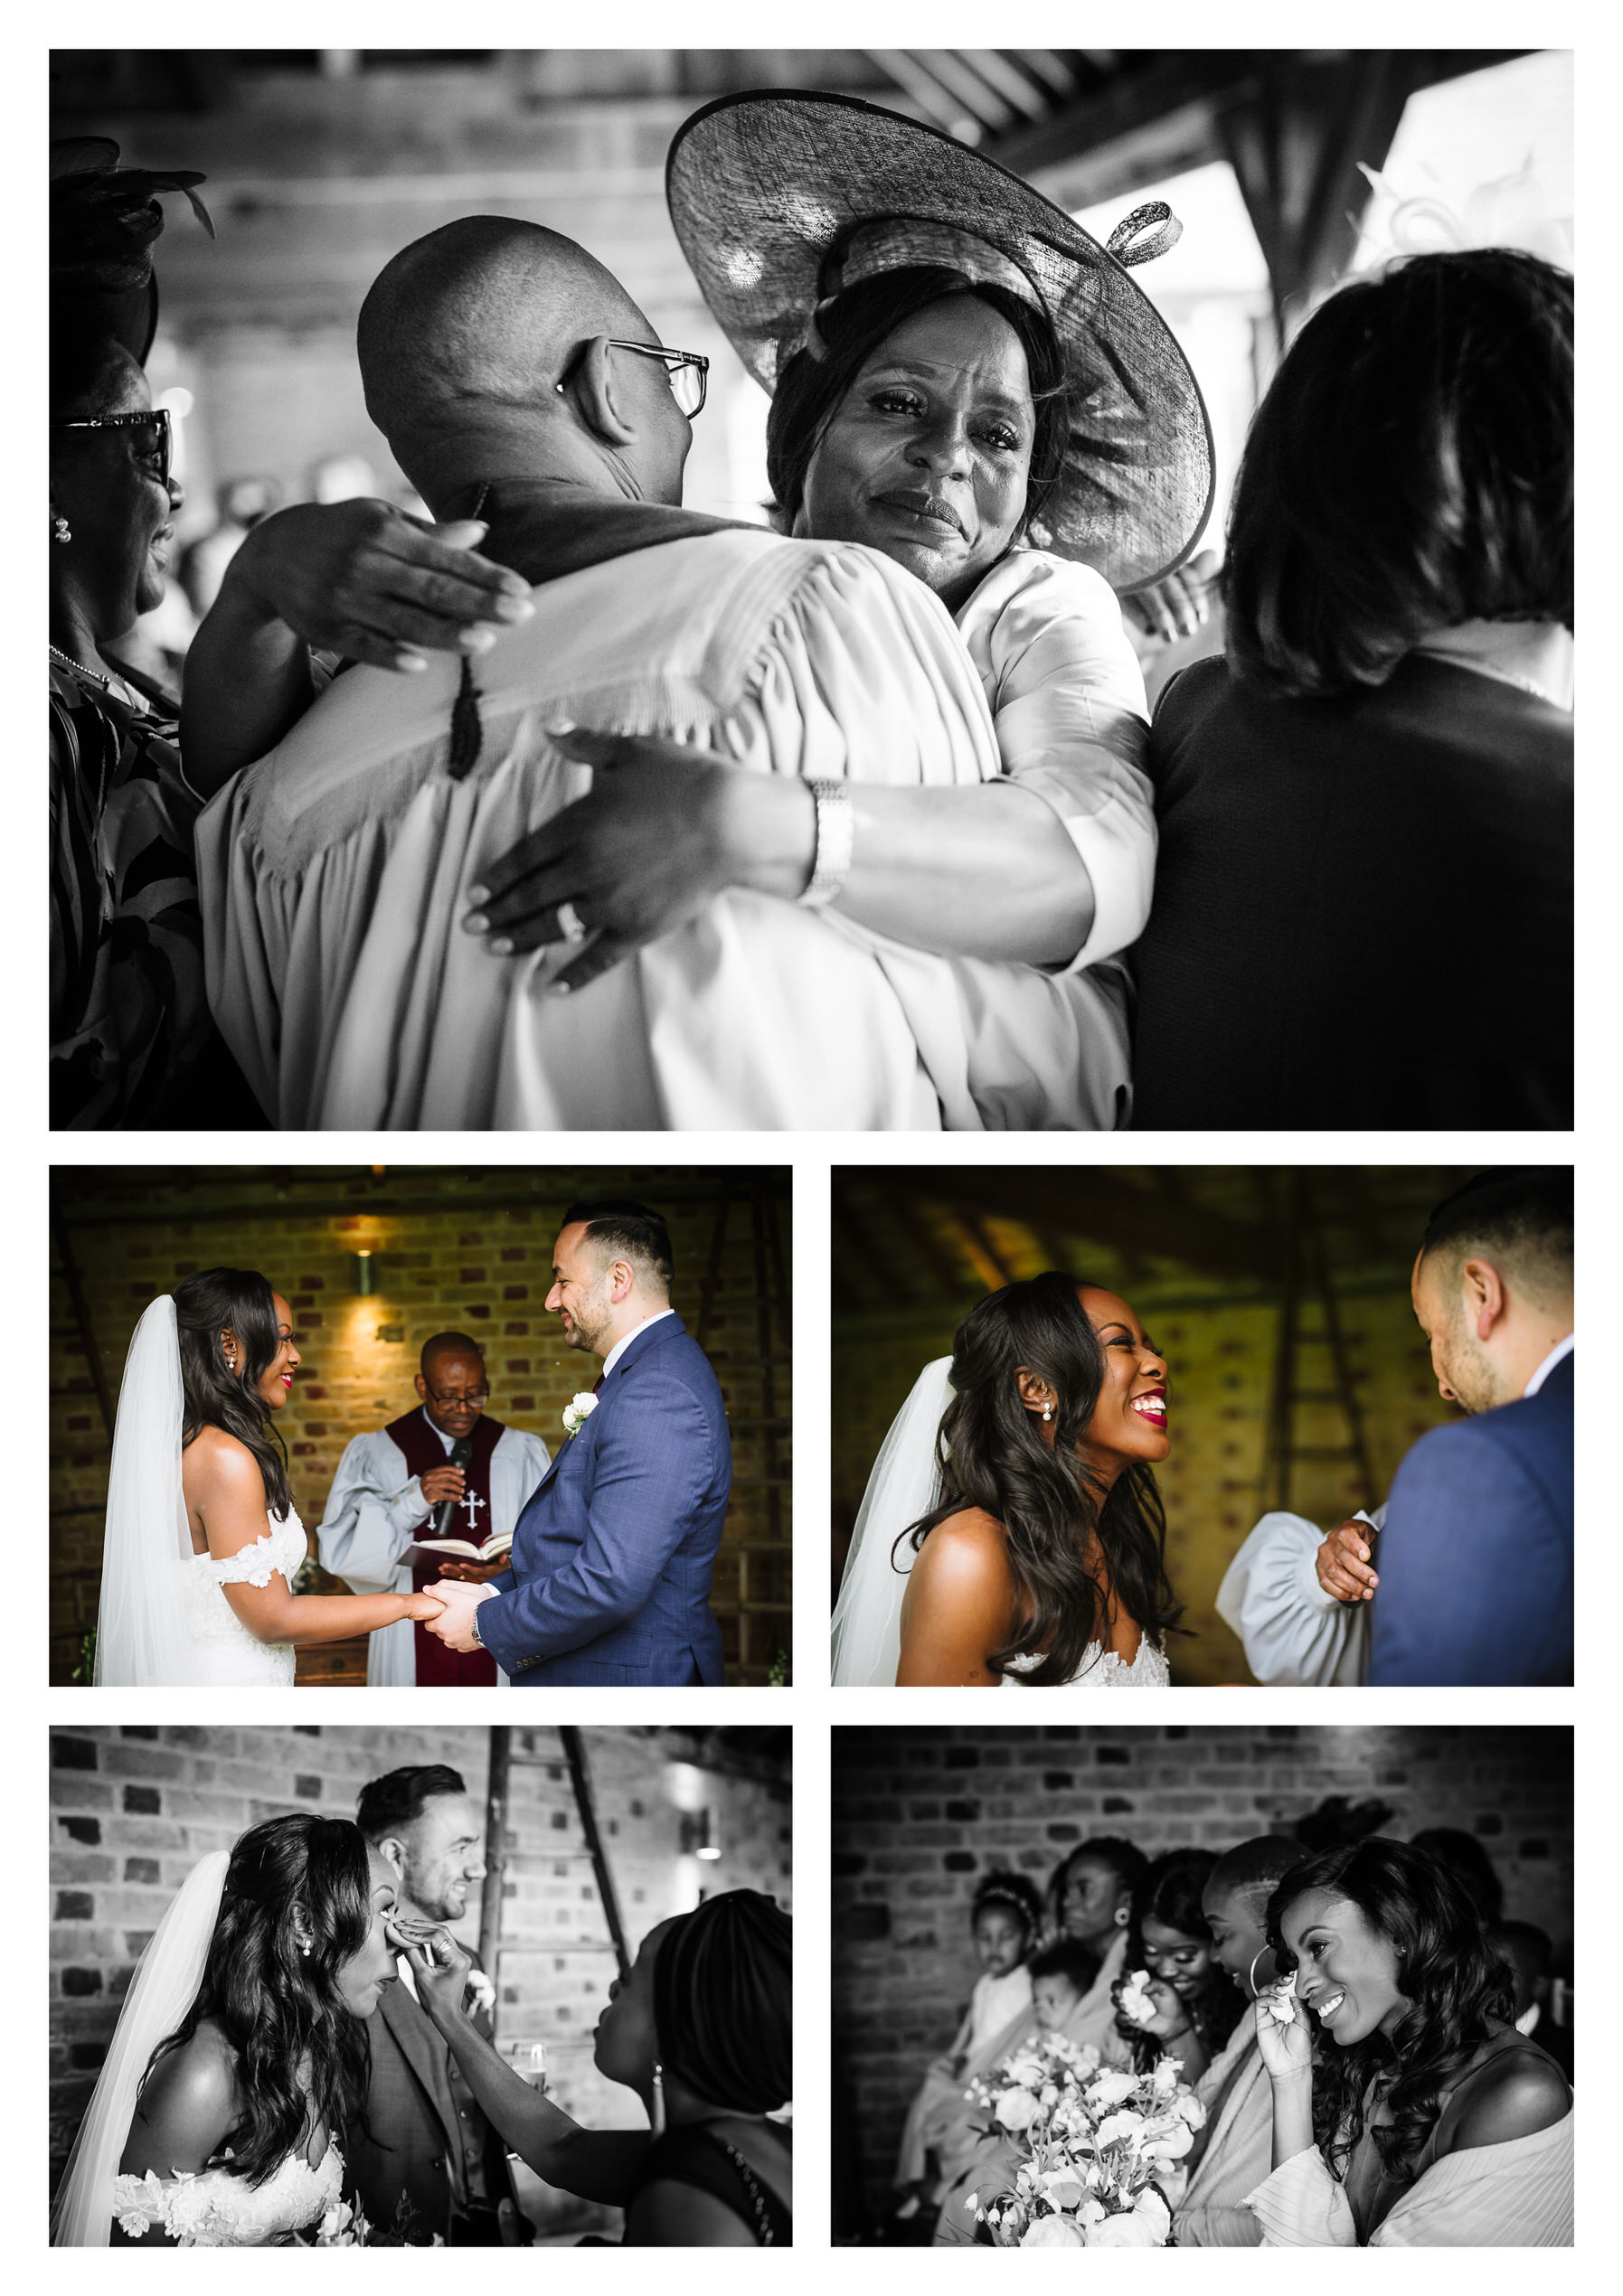 special moments captured at the night yard wedding